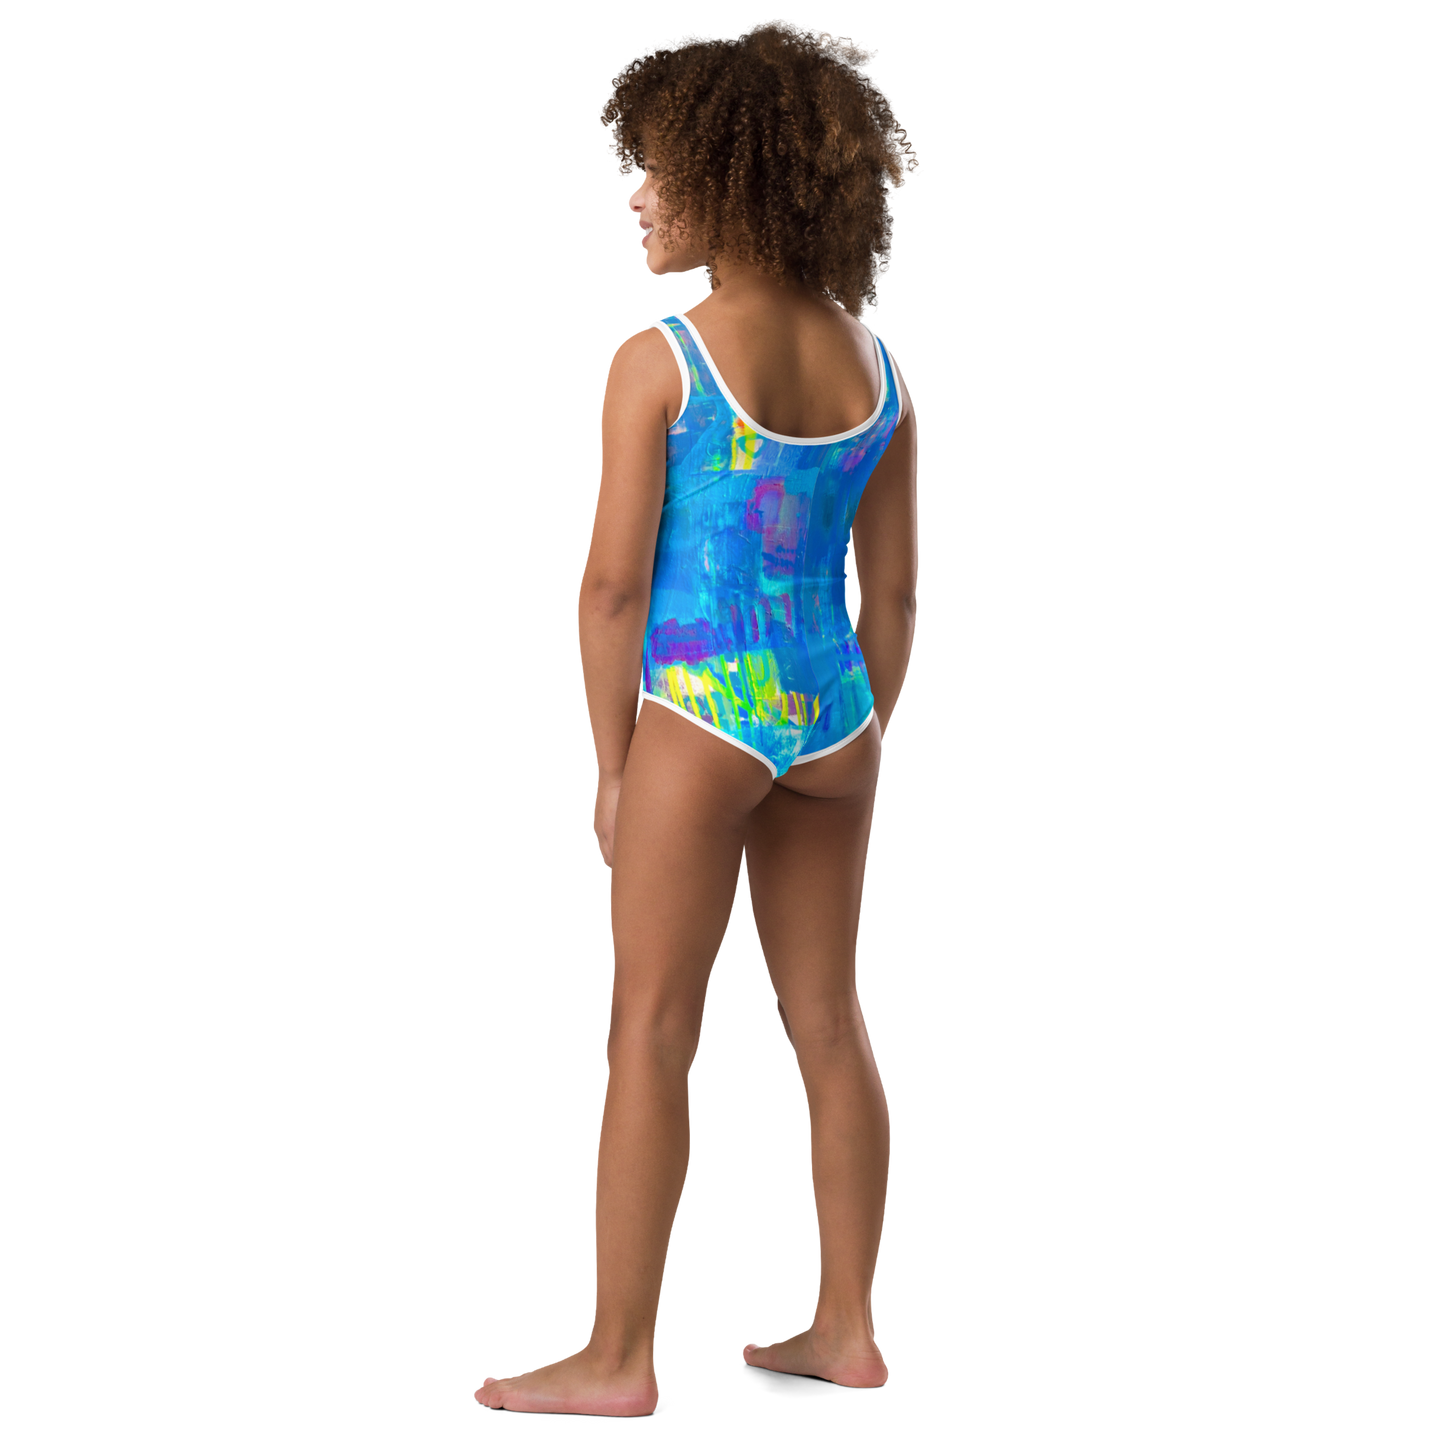 Coloring the Motion - All-Over Print Kids Swimsuit